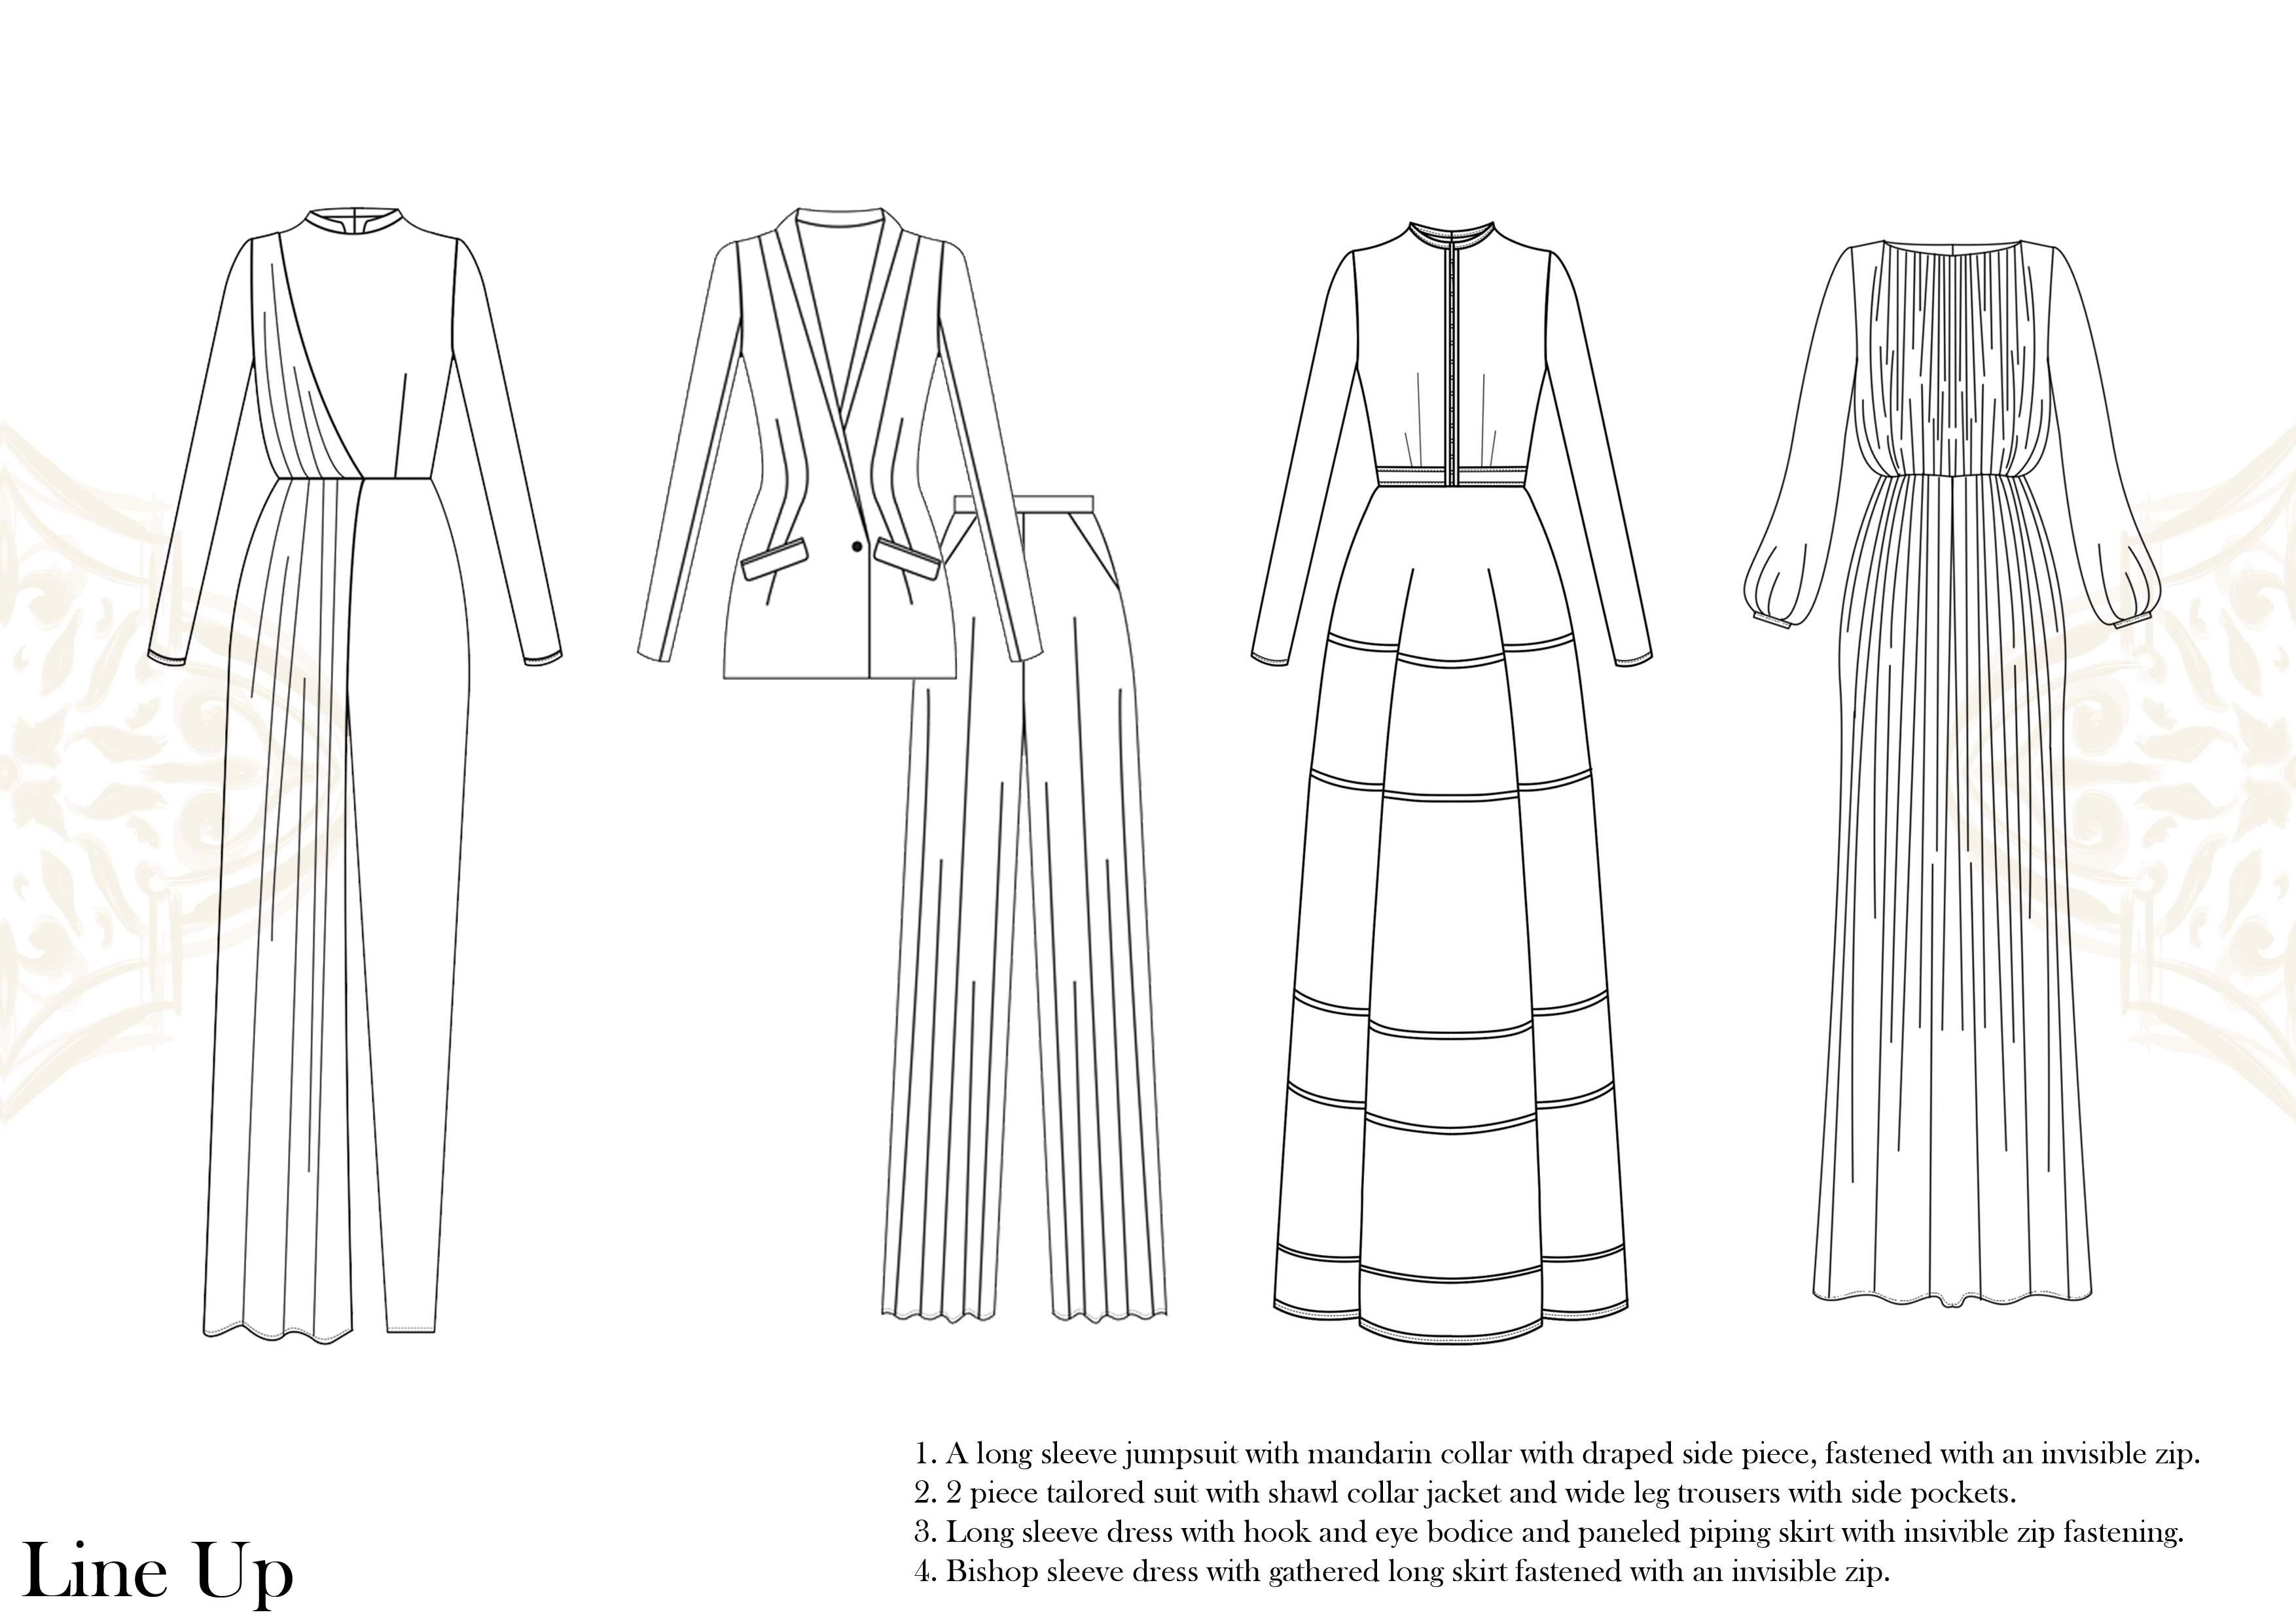 &gt;=

 

1. A long sleeve jumpsuit with mandarin collar with draped side piece, fastened with an mvisible zp.
2. 2 piece tailored suit with shawl collar jacket and wide leg trousers with side pockets.
3. Long sleeve dress with hook and eye bodice and paneled piping skirt with msivible zip fastening,

I. Bishop sleeve dress with gathered long skirt fastened with an mvisible zip.

Line Up